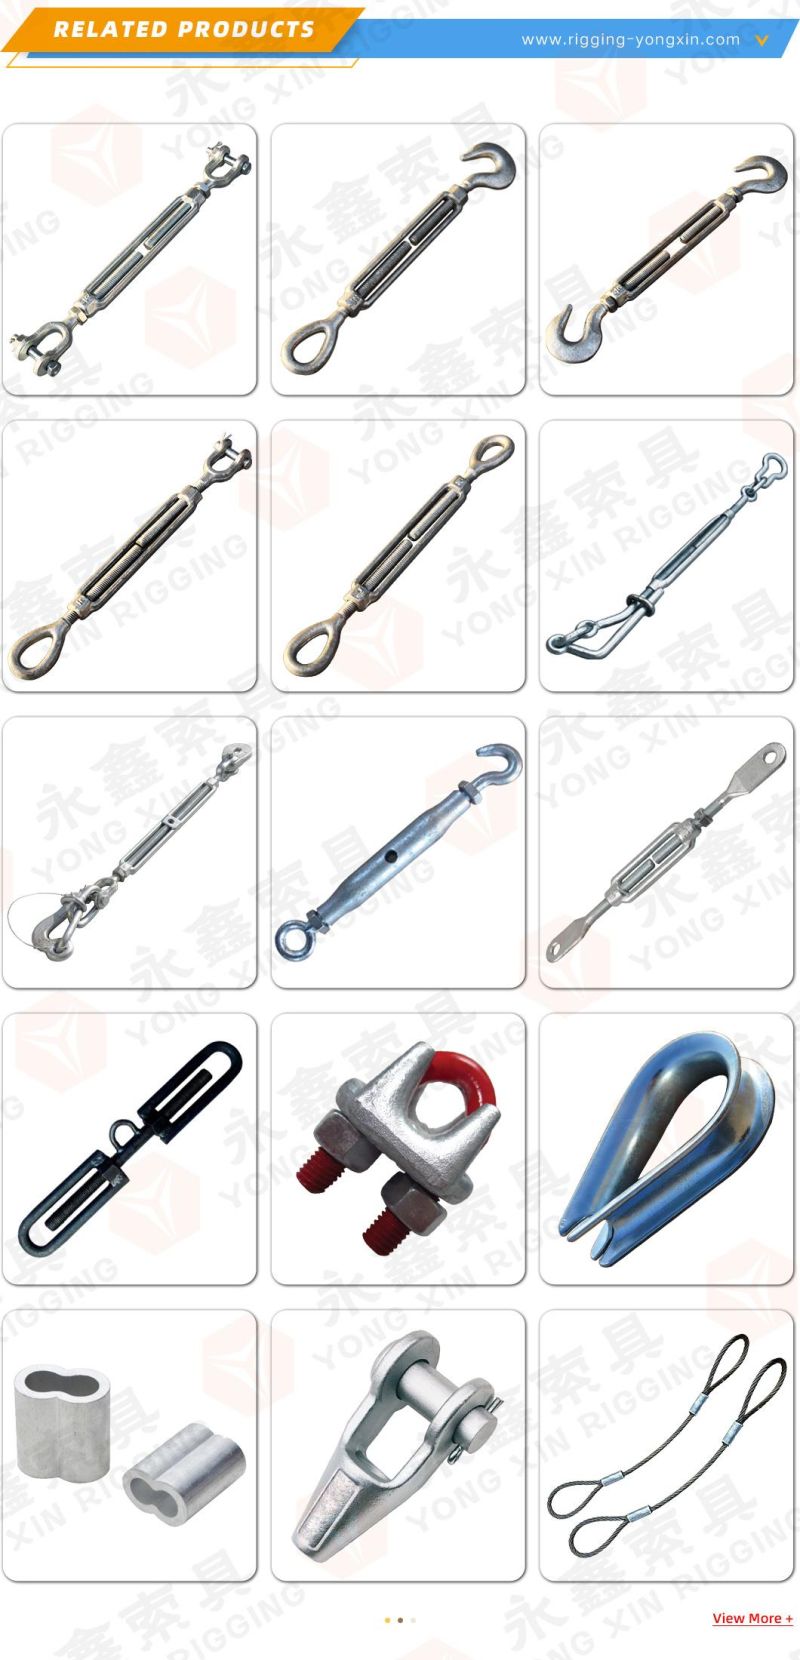 M6-M56 Standard Drop Forged Stainless Steel DIN1480 Turnbuckles with Hook and Eye